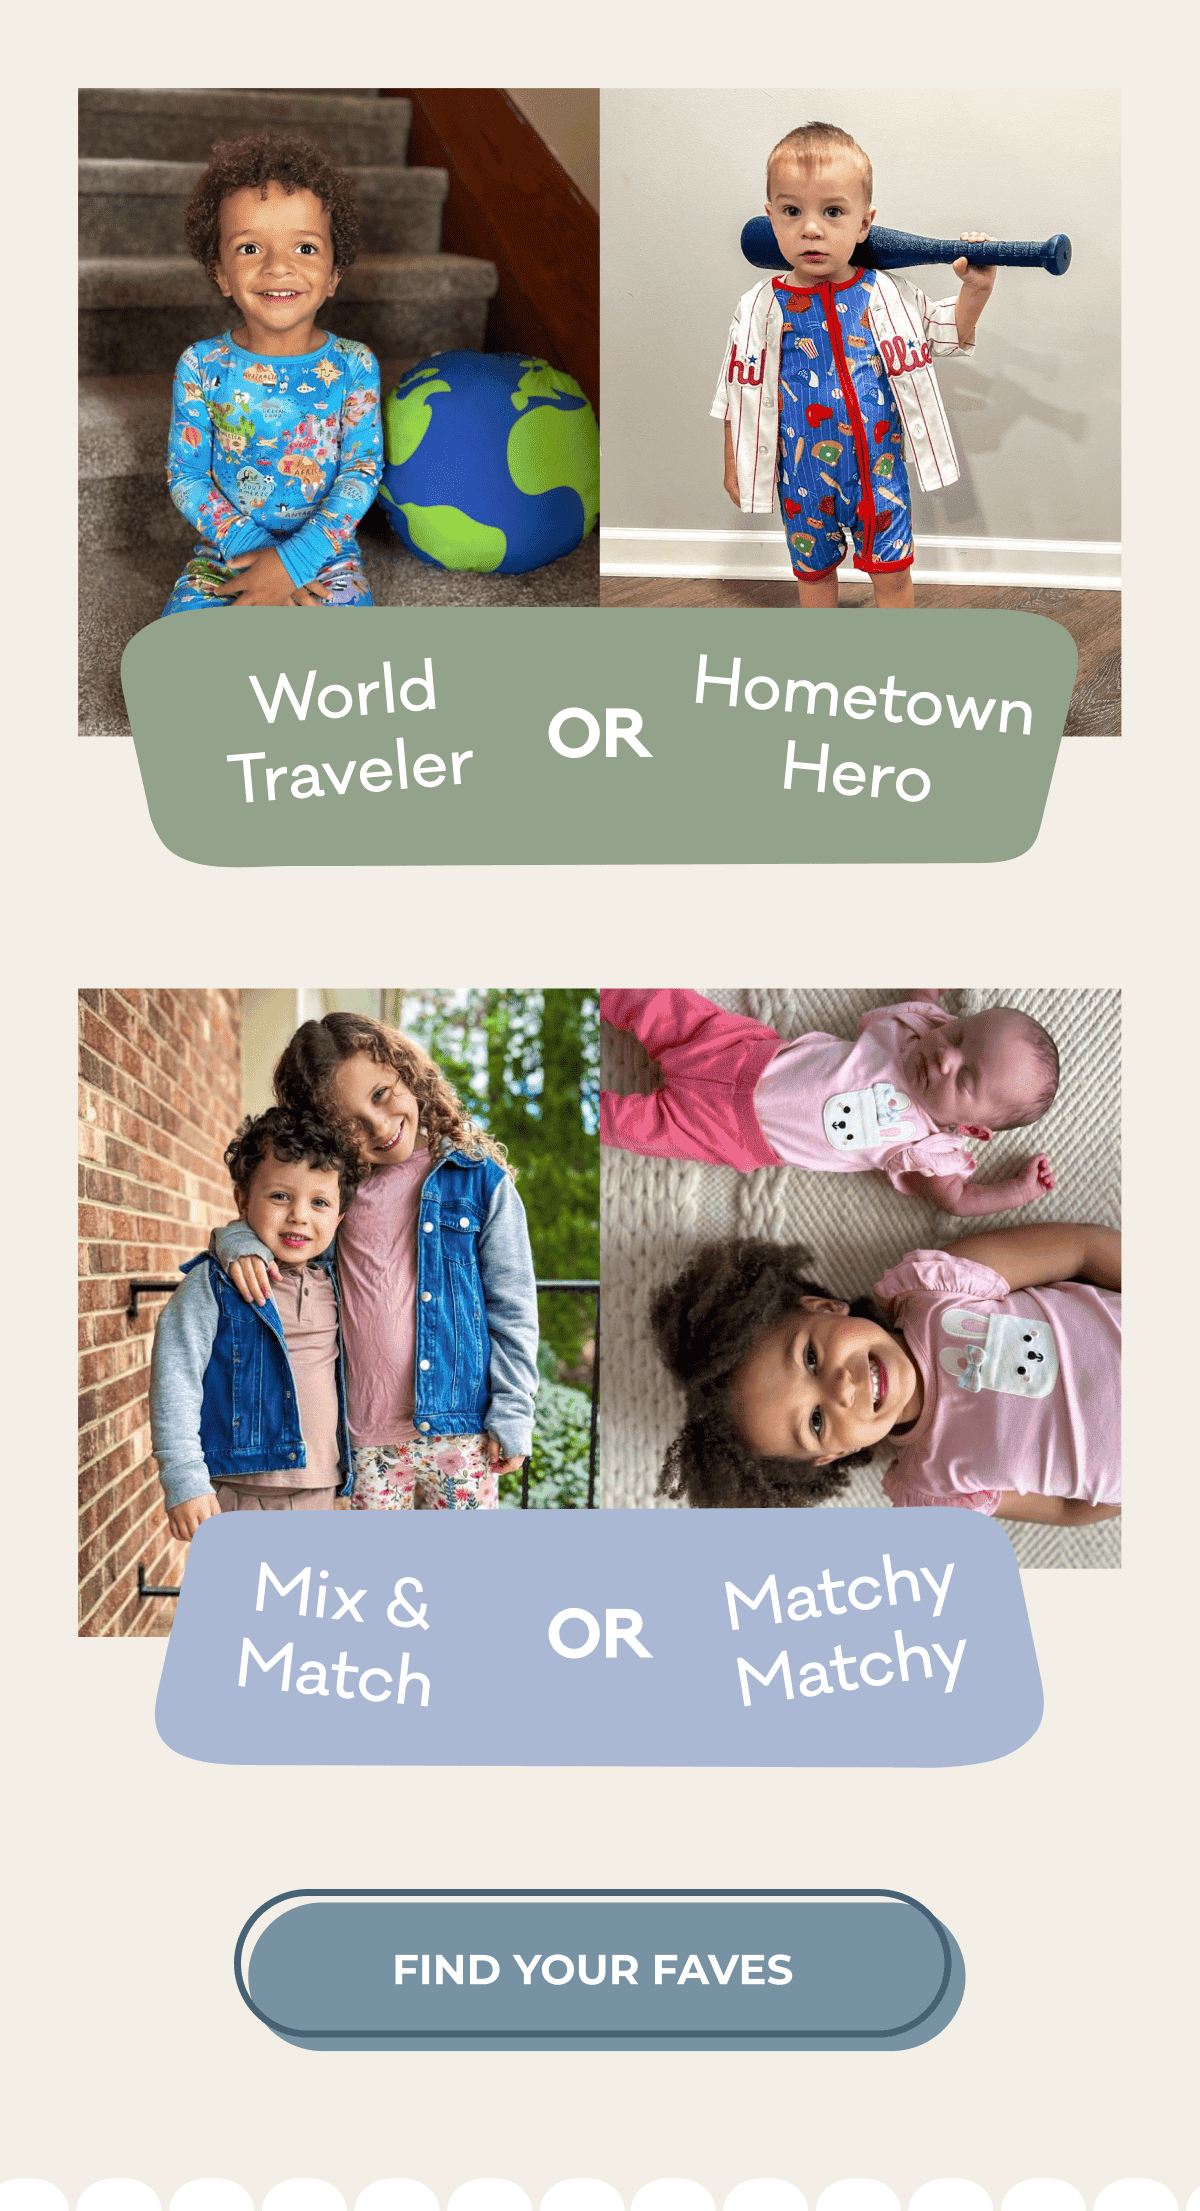 World Traveler OR Hometown Hero | Mix & Match OR Matchy Matchy | FIND YOUR FAVES